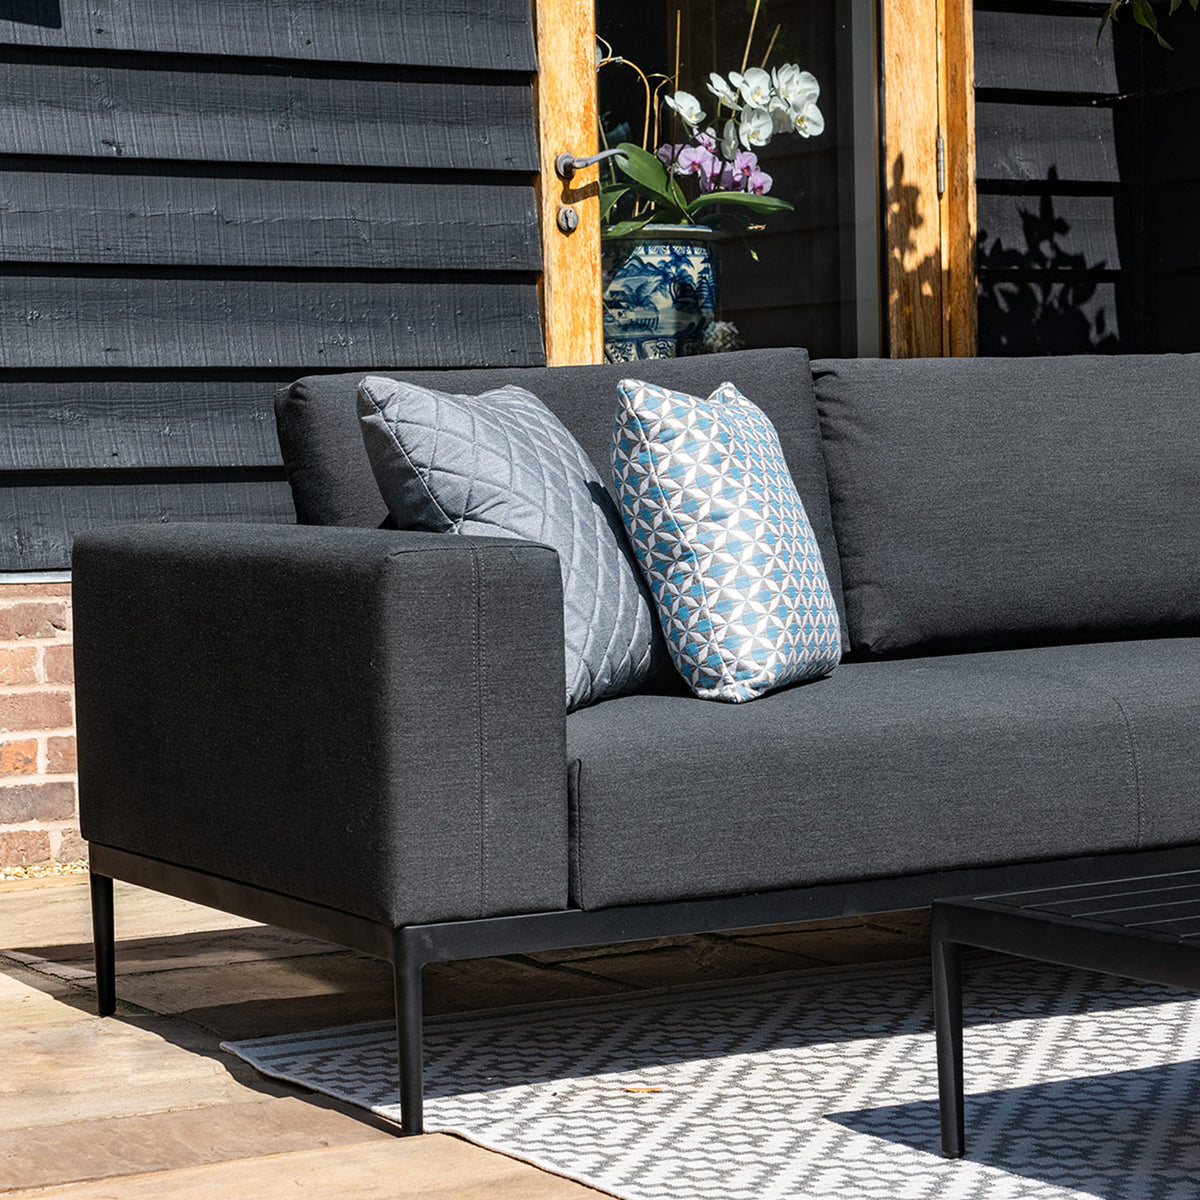 Maze Eve Charcoal Corner Sofa Group from Roseland Furniture